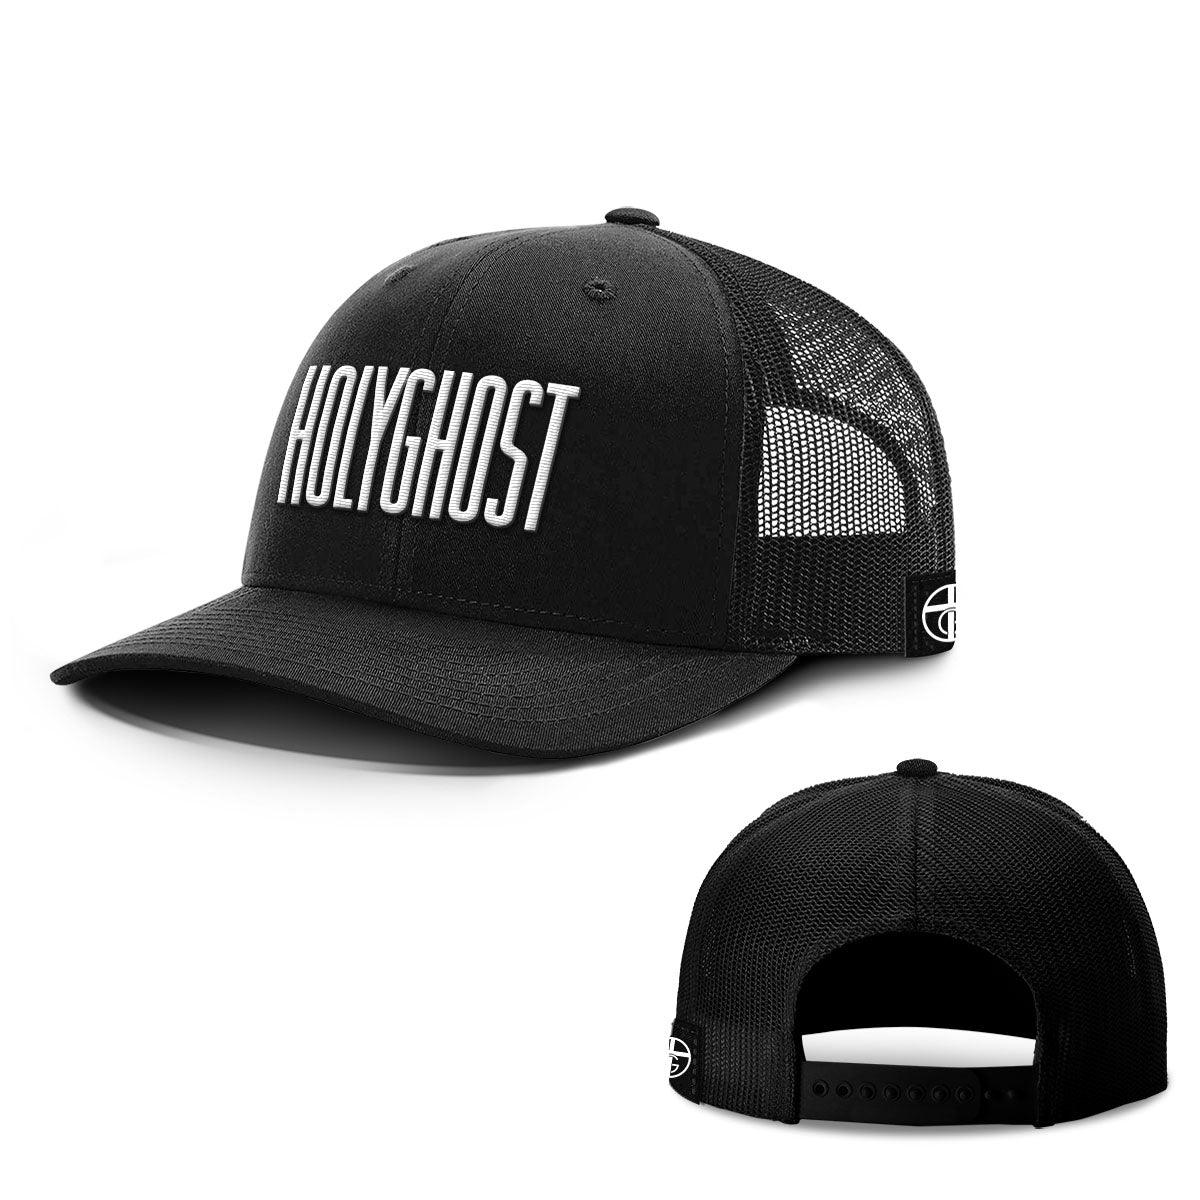 Holy Ghost Hats - Our True God